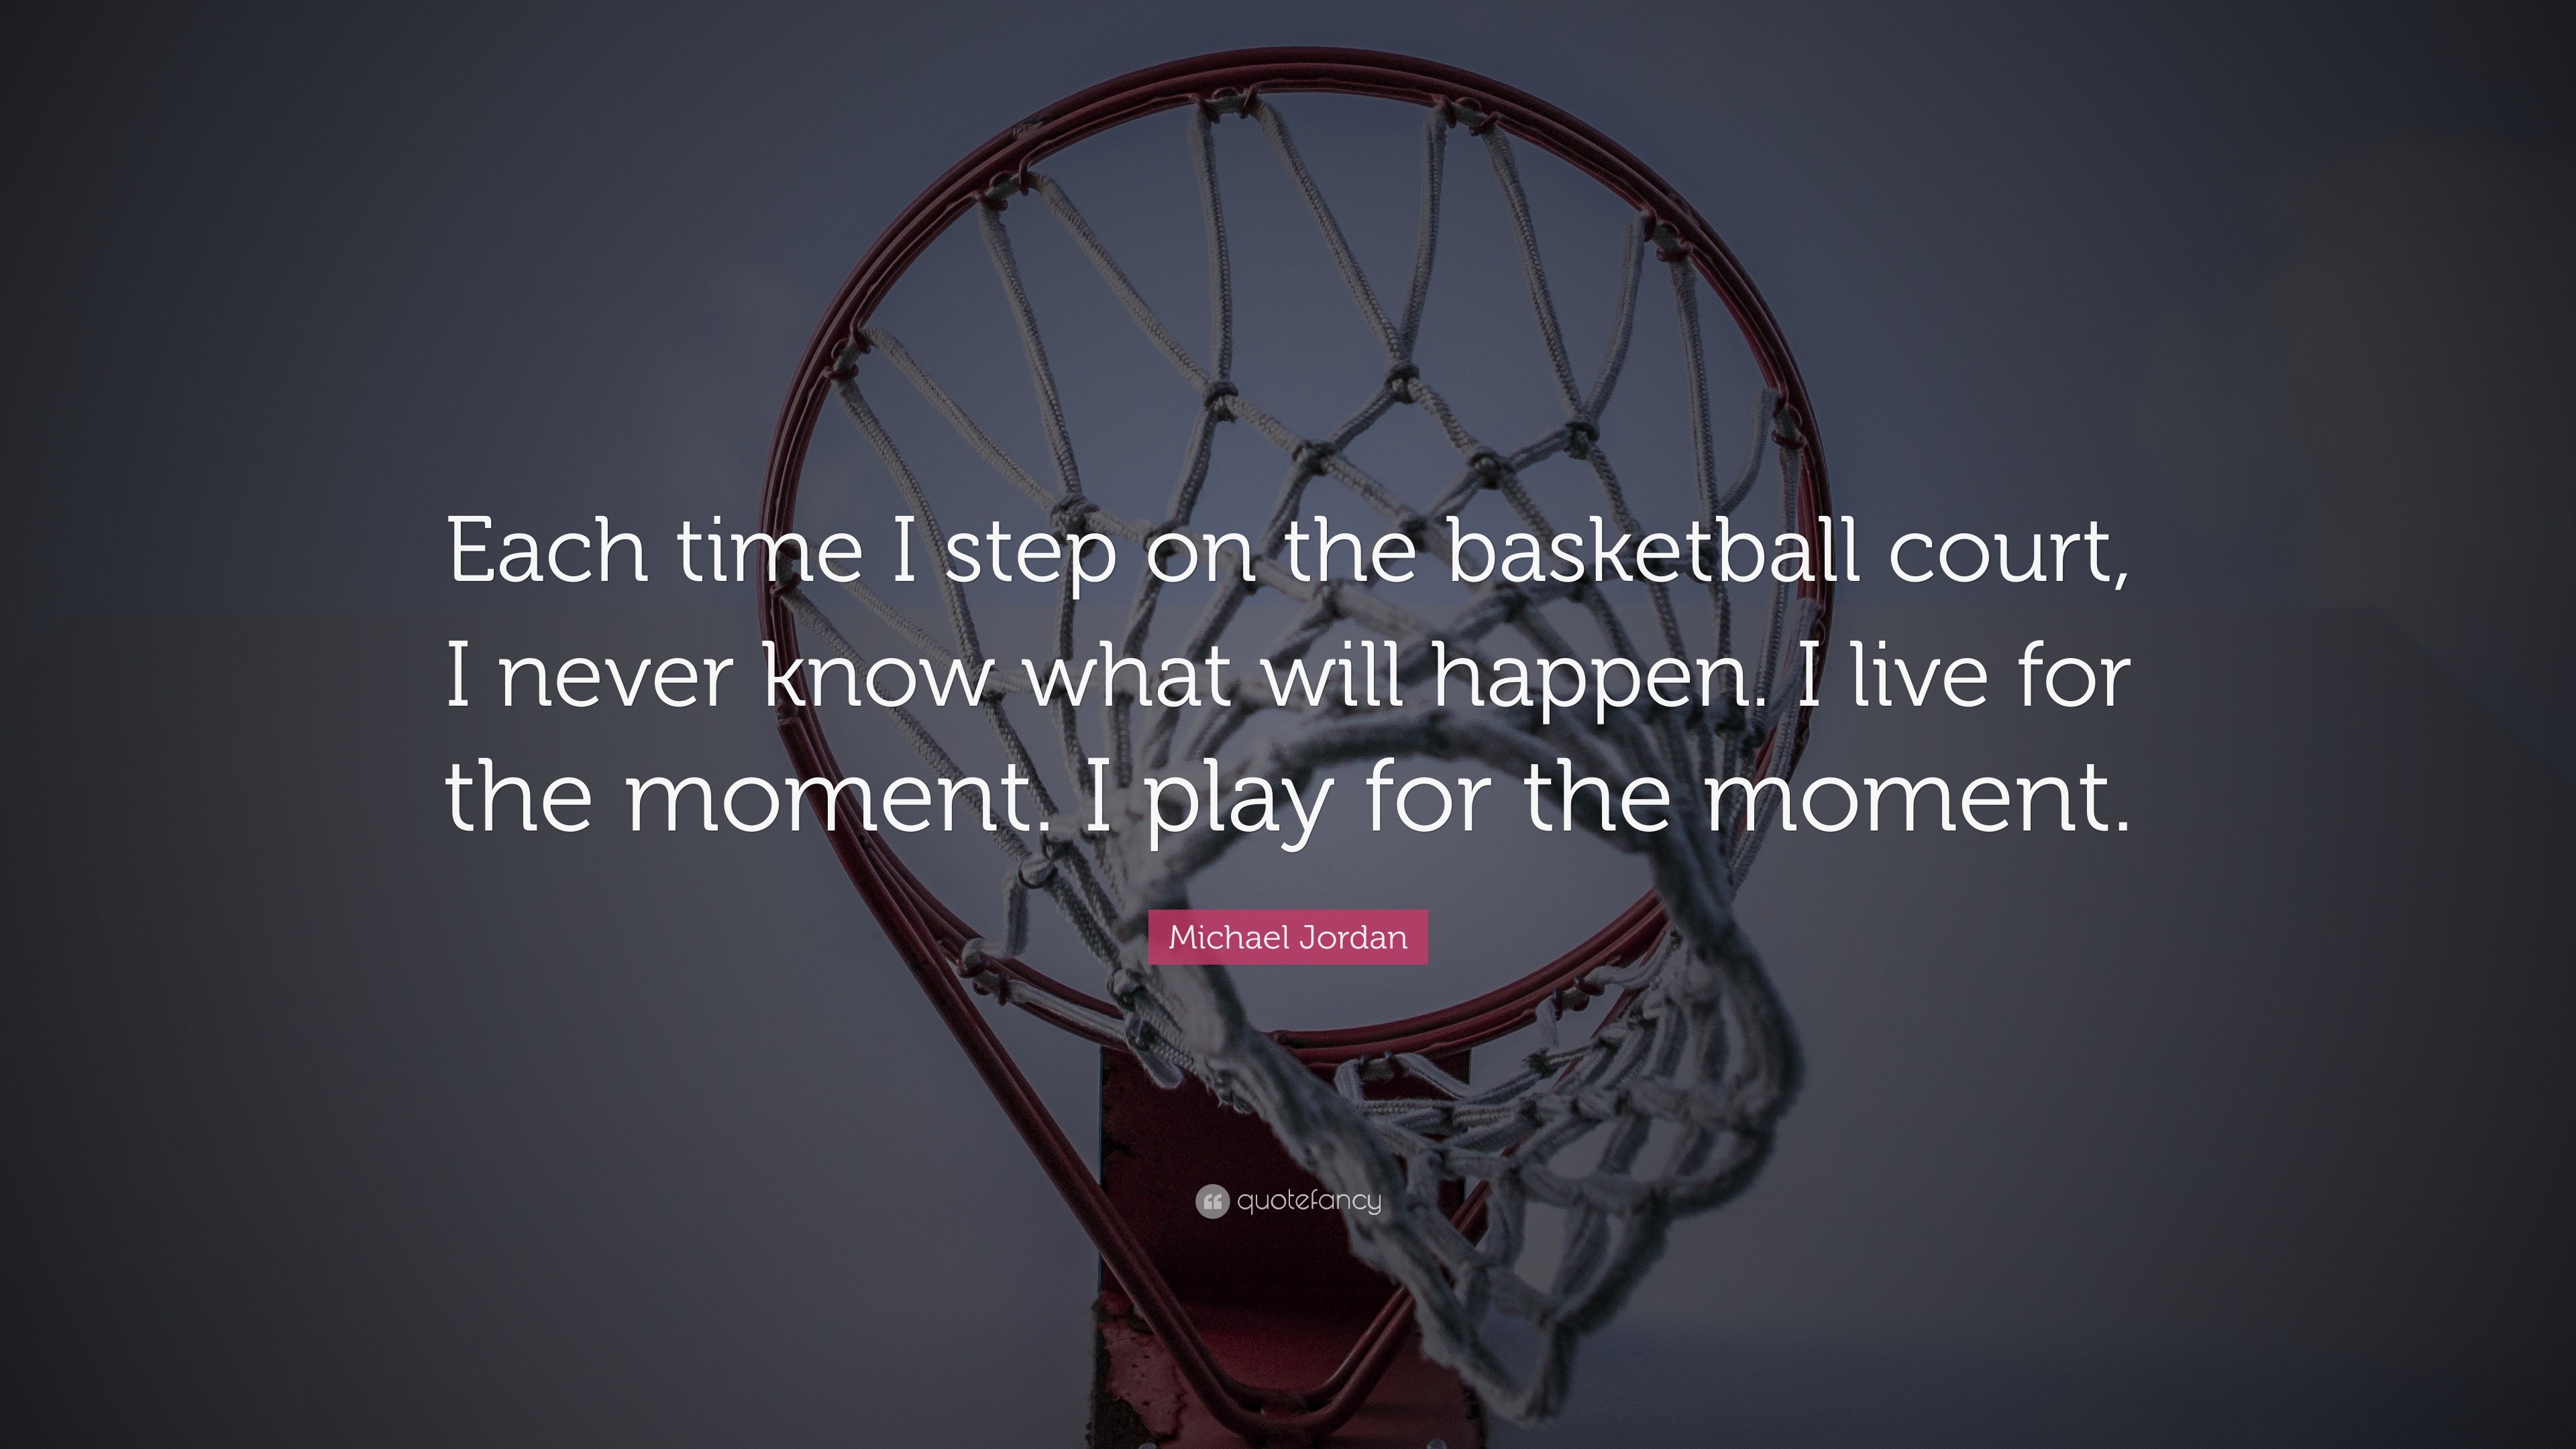 3840x2160 Michael Jordan Quote: “Each time I step on the basketball court, I never